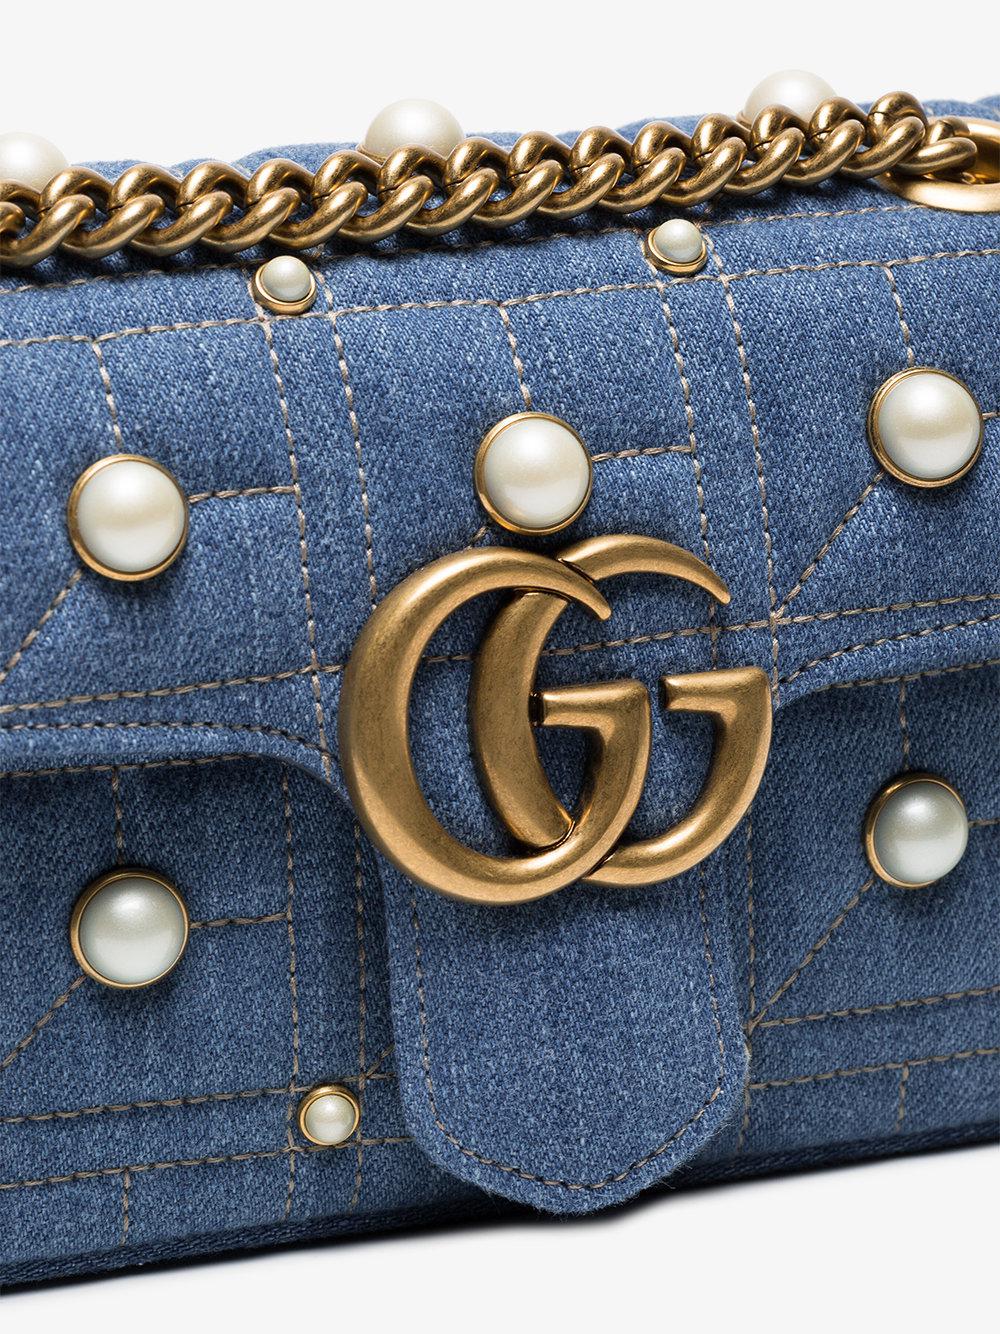 GUCCI-MARMONT-BAG-ZARA-JEANS-WITH-PEARLS - Bonjour Chiara